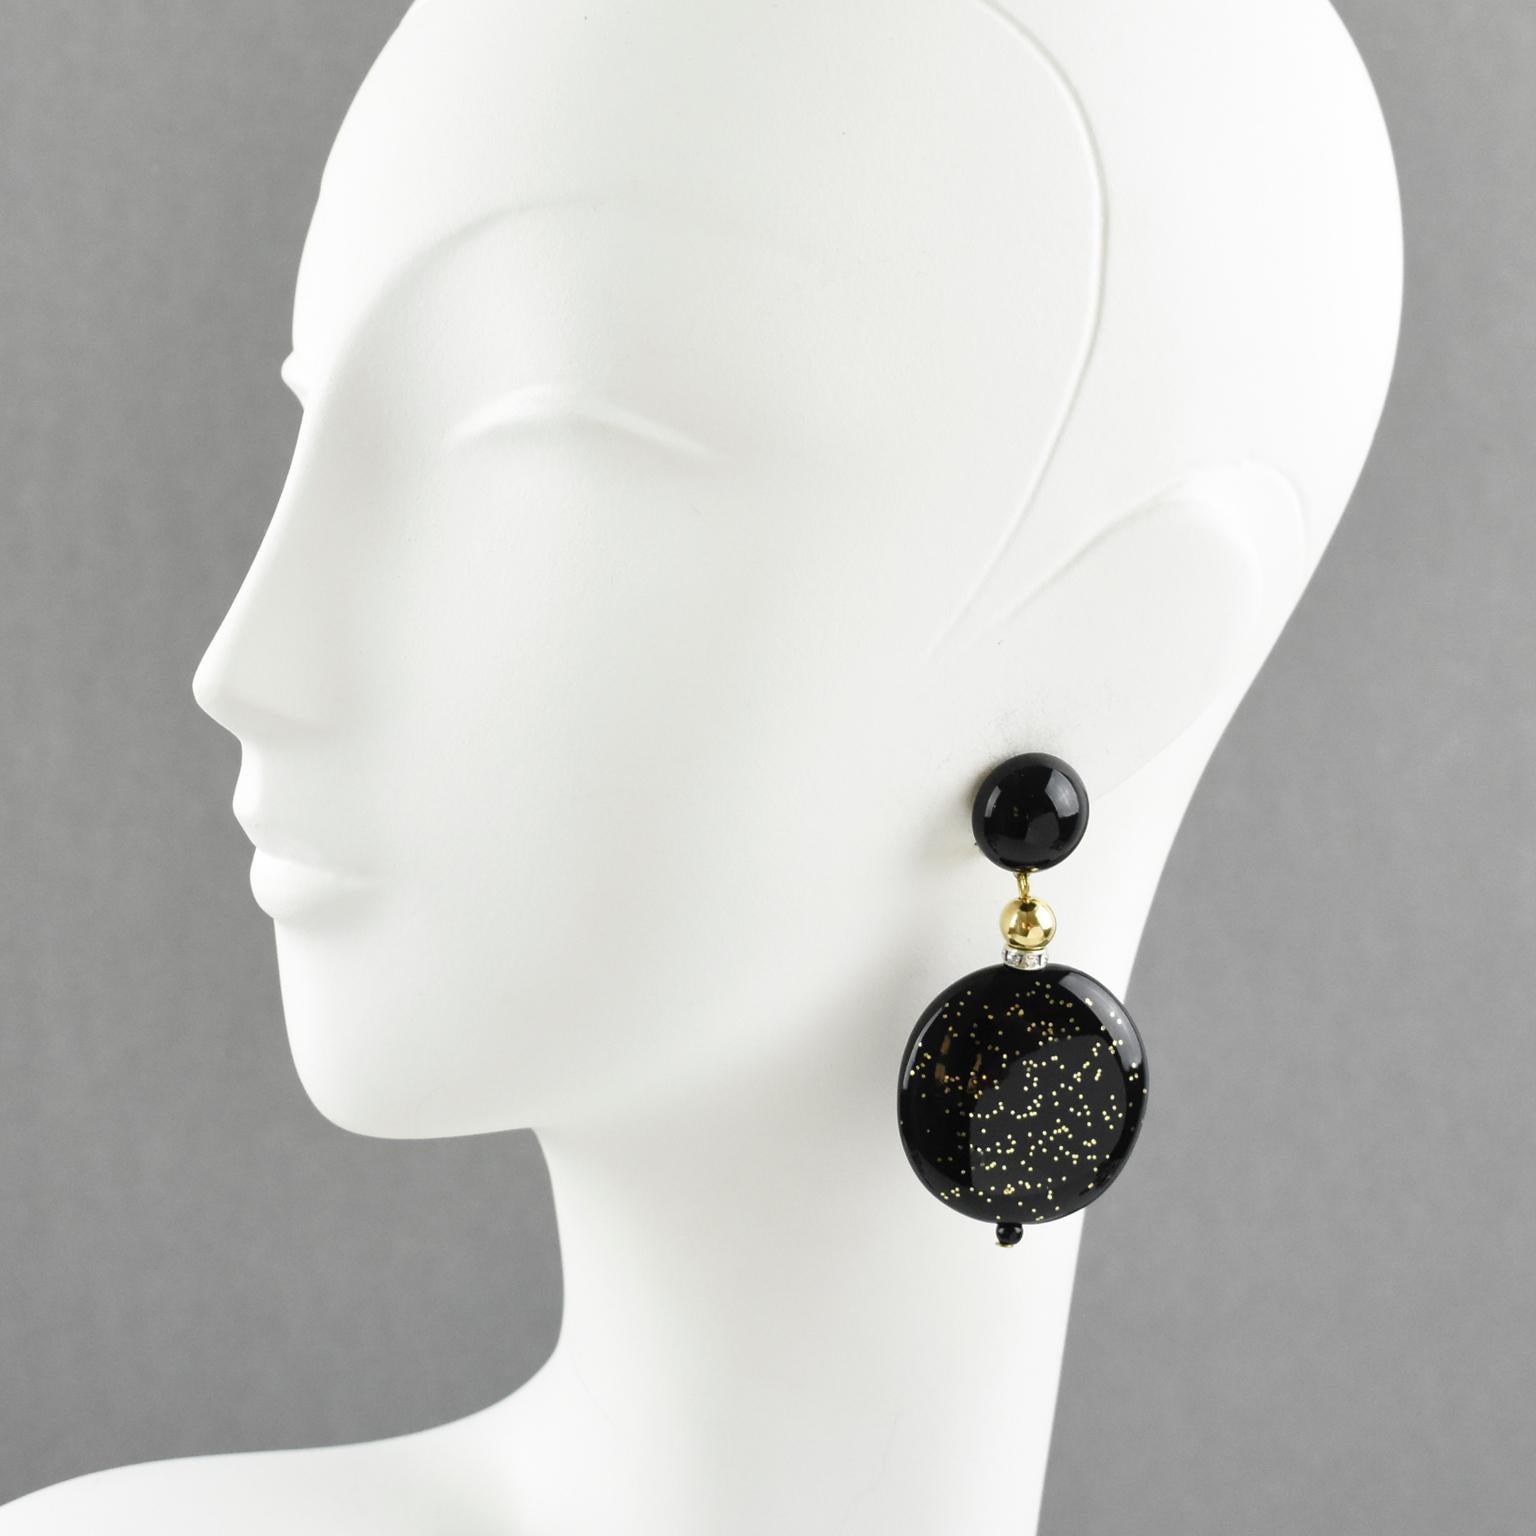 Exquisite Angela Caputi, made in Italy resin clip-on earrings. Dangling shape with black color geometric pebble bead contrasted with gold flakes and compliment with a tiny clear rhinestones spacer ring. Her matching of colors is always extremely